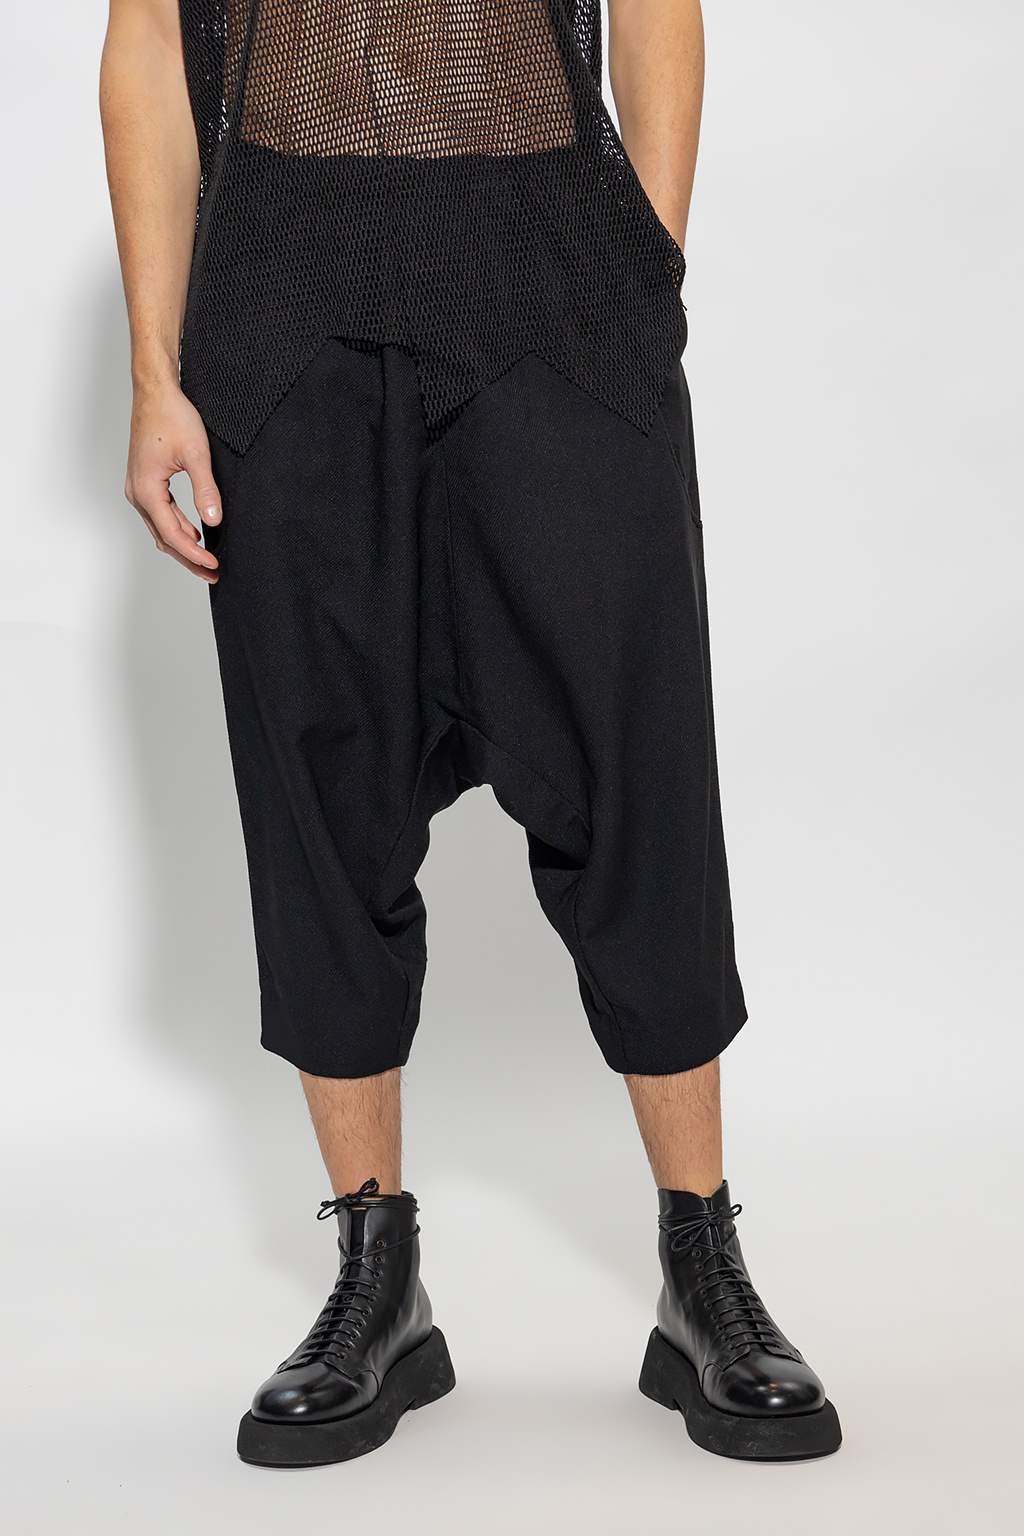 Comme des Garçons Black Relaxed-fitting brushed trousers